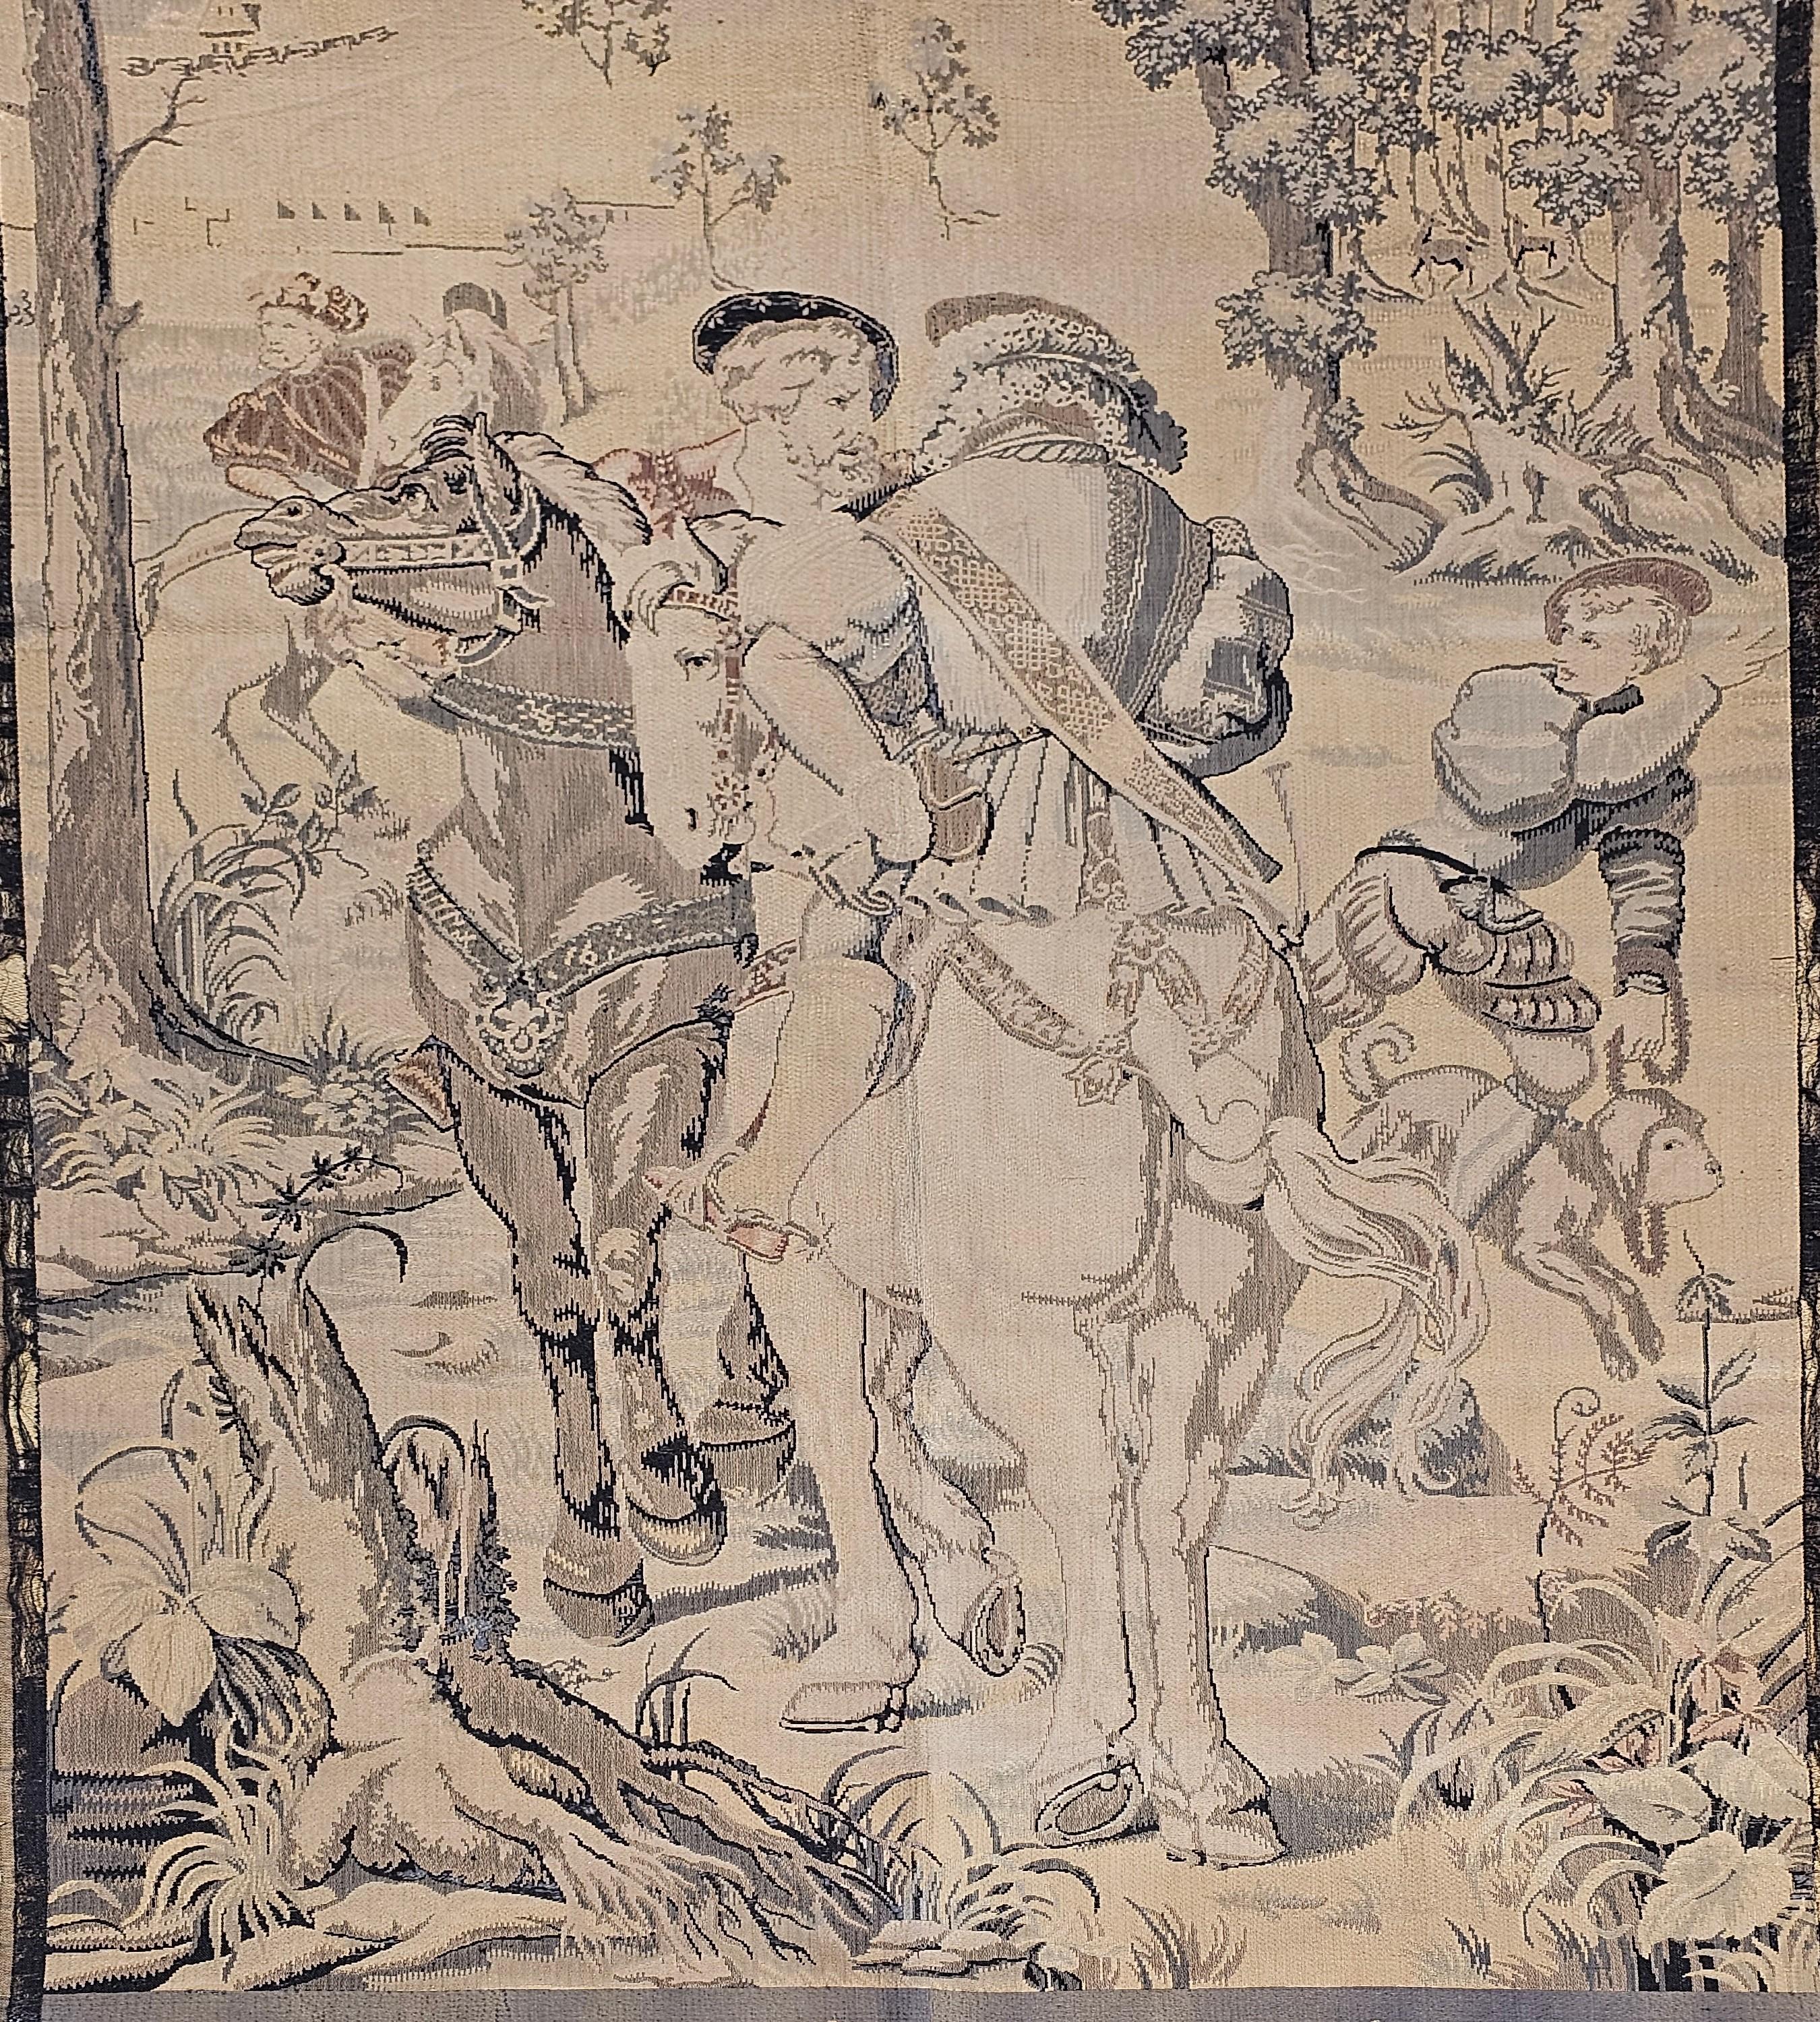 Beautiful 19th century Jacquard Loom machine-woven French tapestry in the style of 16th century Belgium tapestries depicting a forest and hunting scene. This is a reproduction of one of the panels (panel #2)  taken from a famous Renaissance series